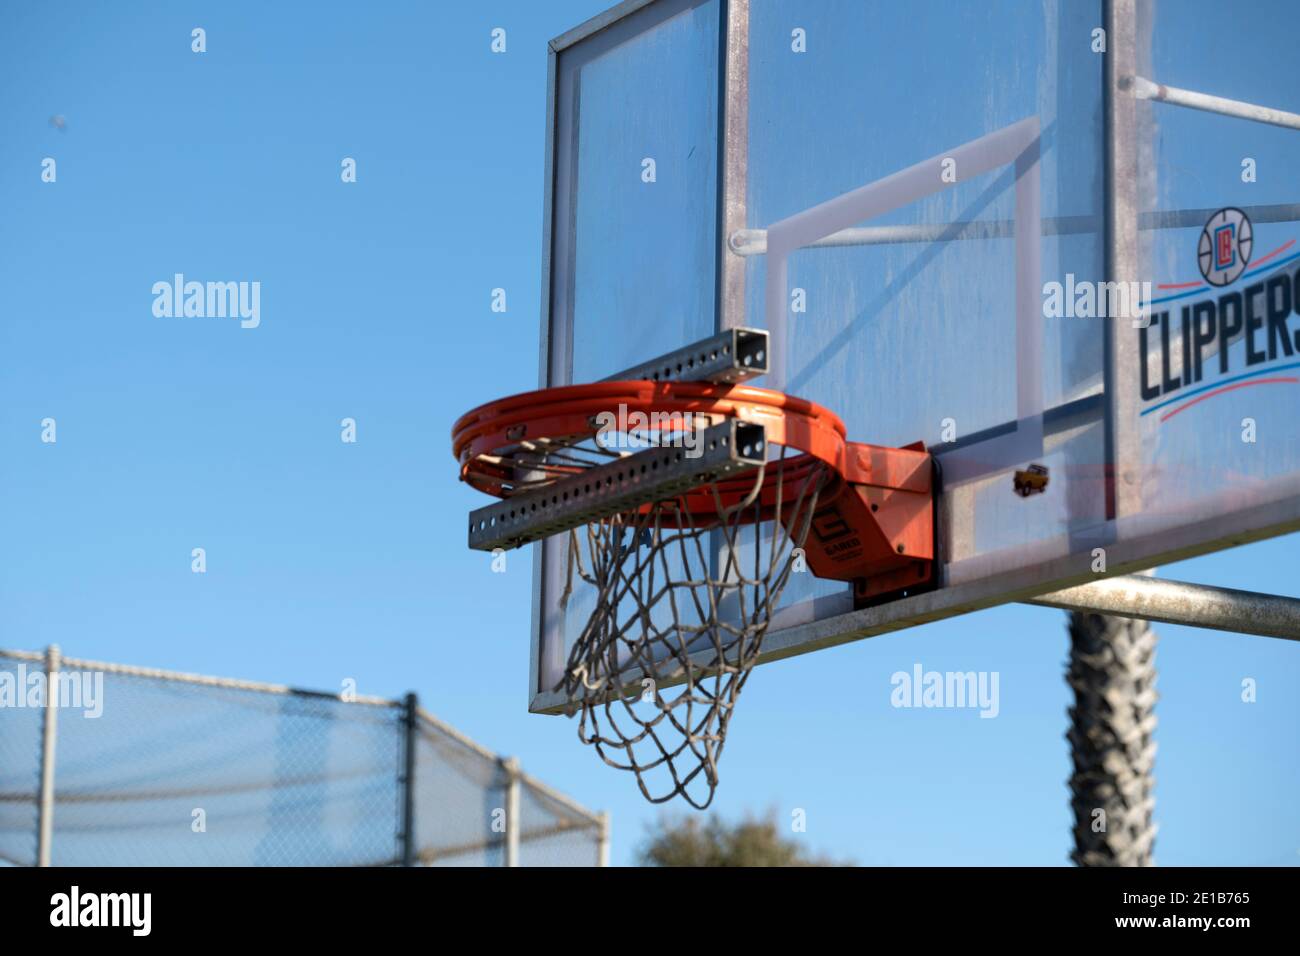 los-angeles-ca-usa-december-19-2020-a-basketball-hoop-is-blocked-with-metal-bars-to-prevent-use-of-the-basketball-court-during-quarantine-2E1B765.jpg